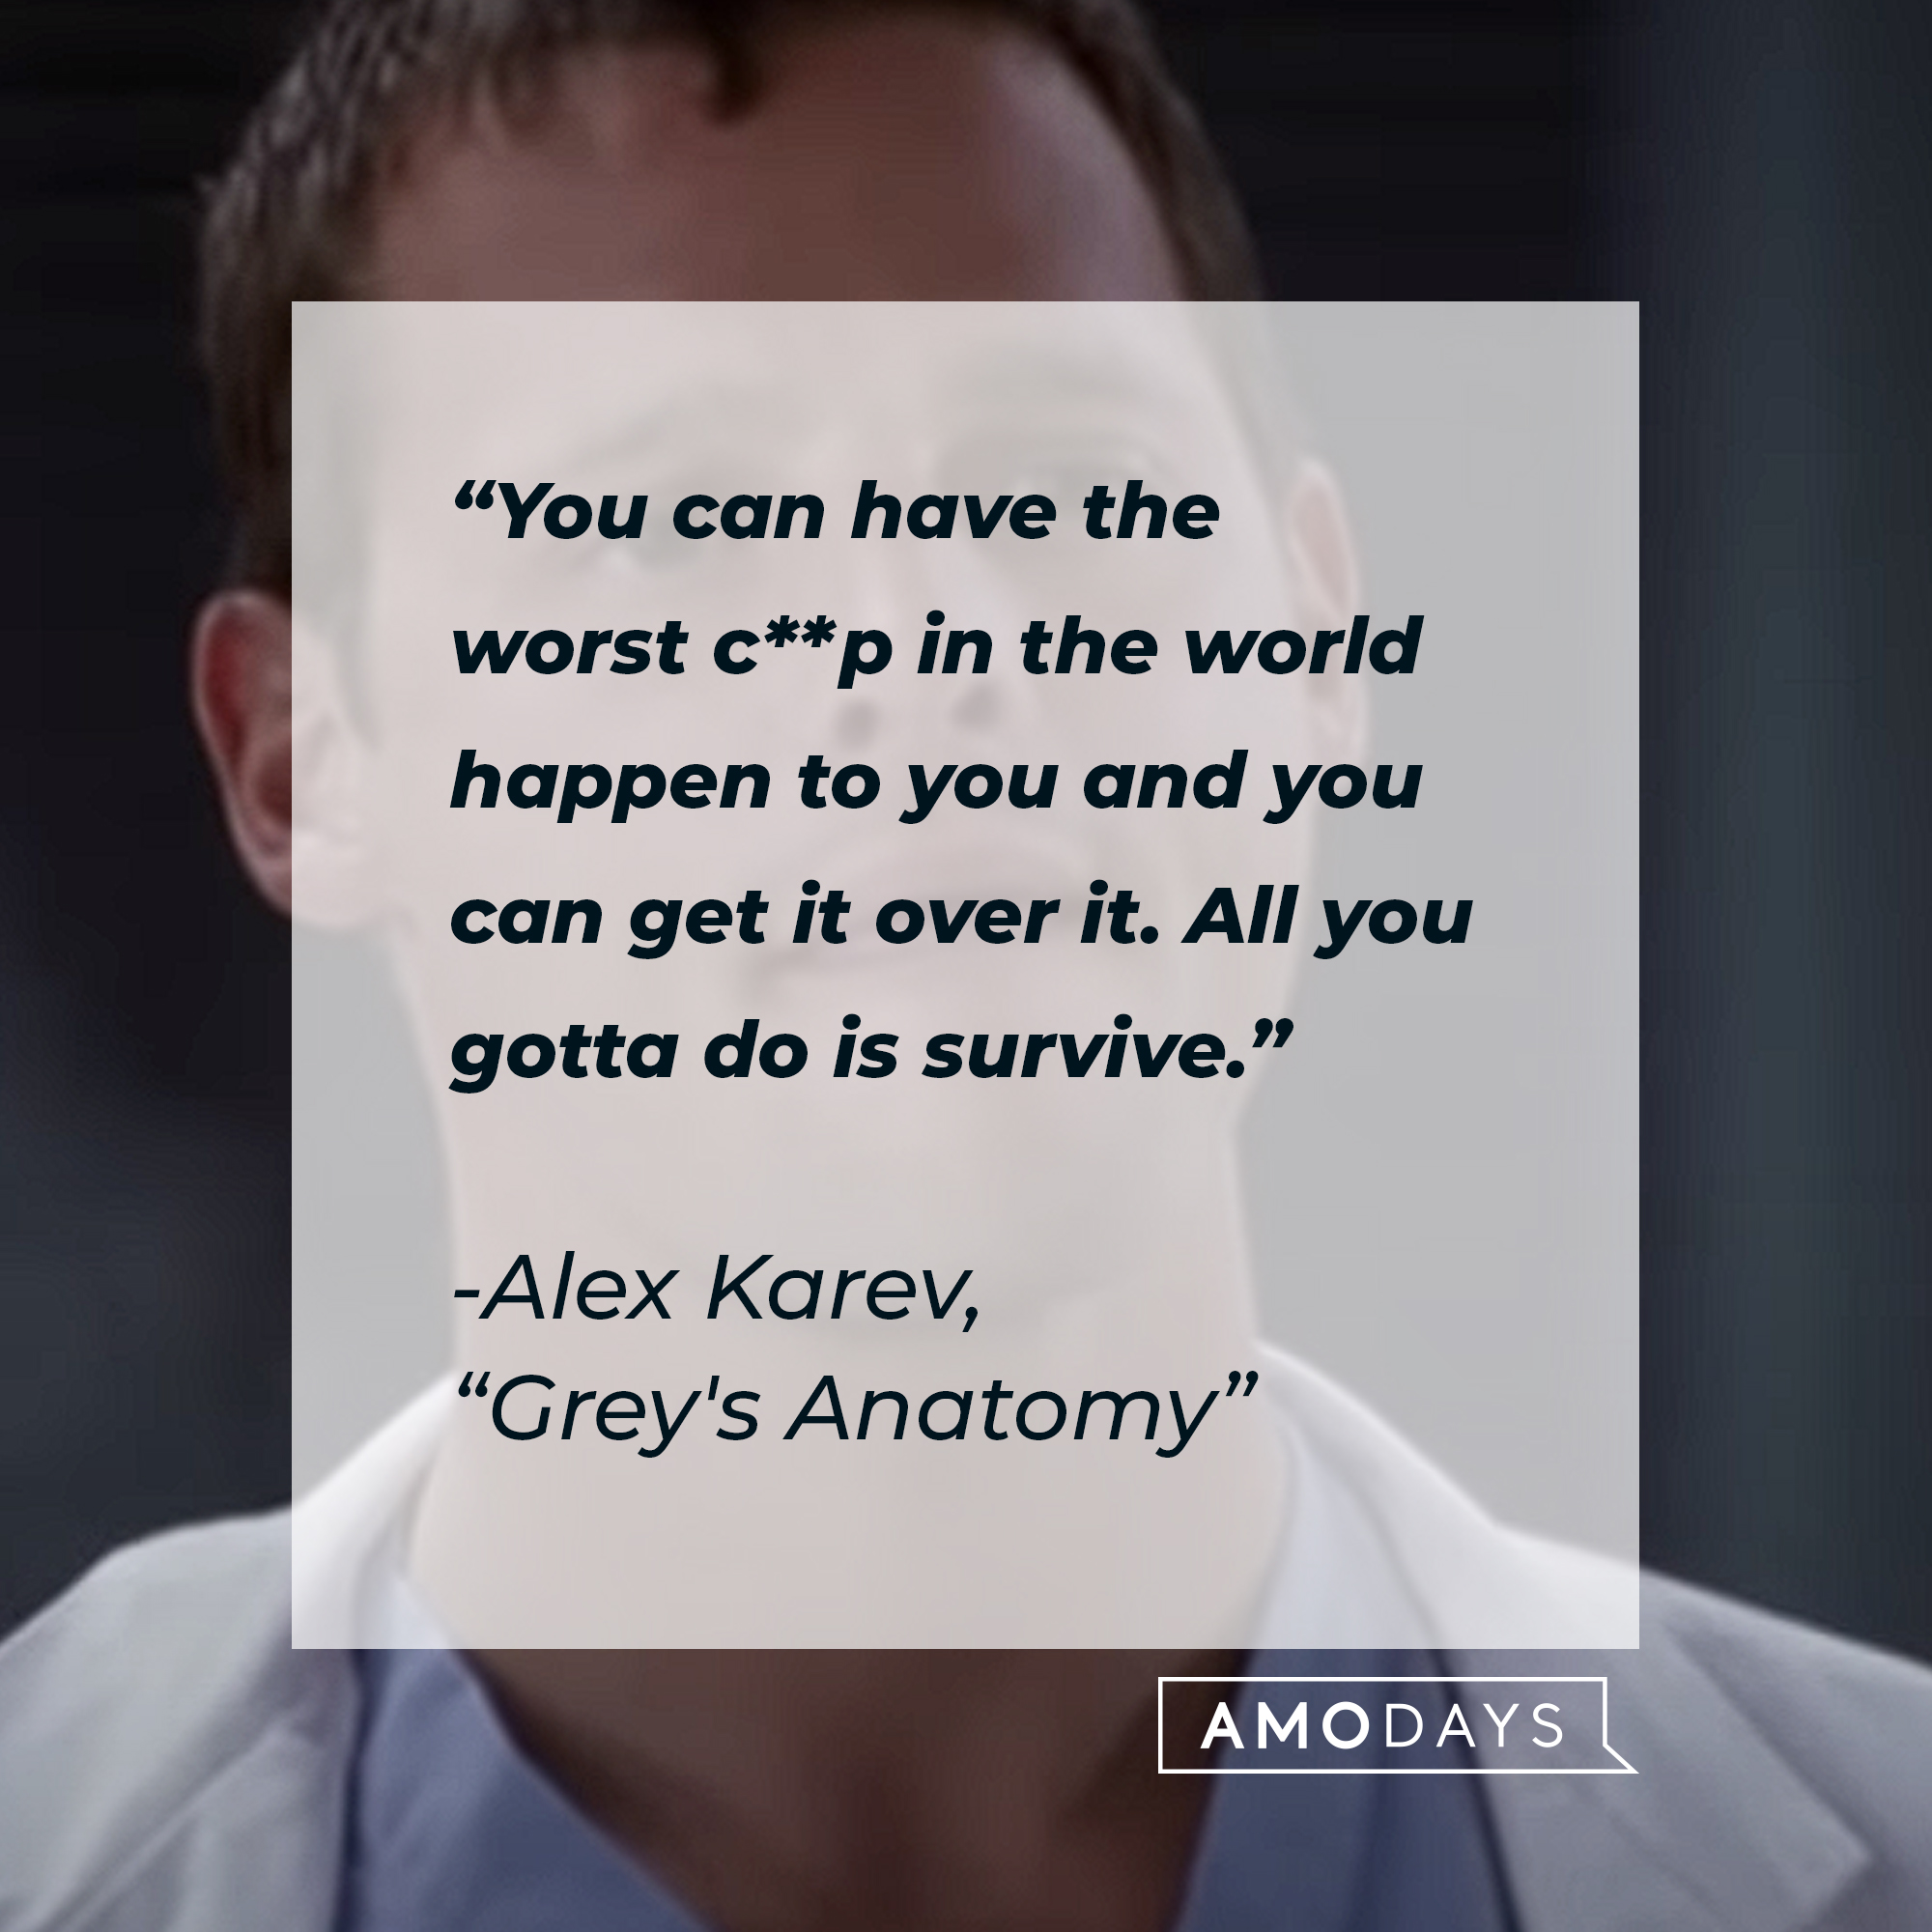 Alex Karev’s quote from “Grey’s Anatomy”: “You can have the worst c**p in the world happen to you and you can get it over it. All you gotta do is survive.” | Source: youtube.com/ABCNetwork